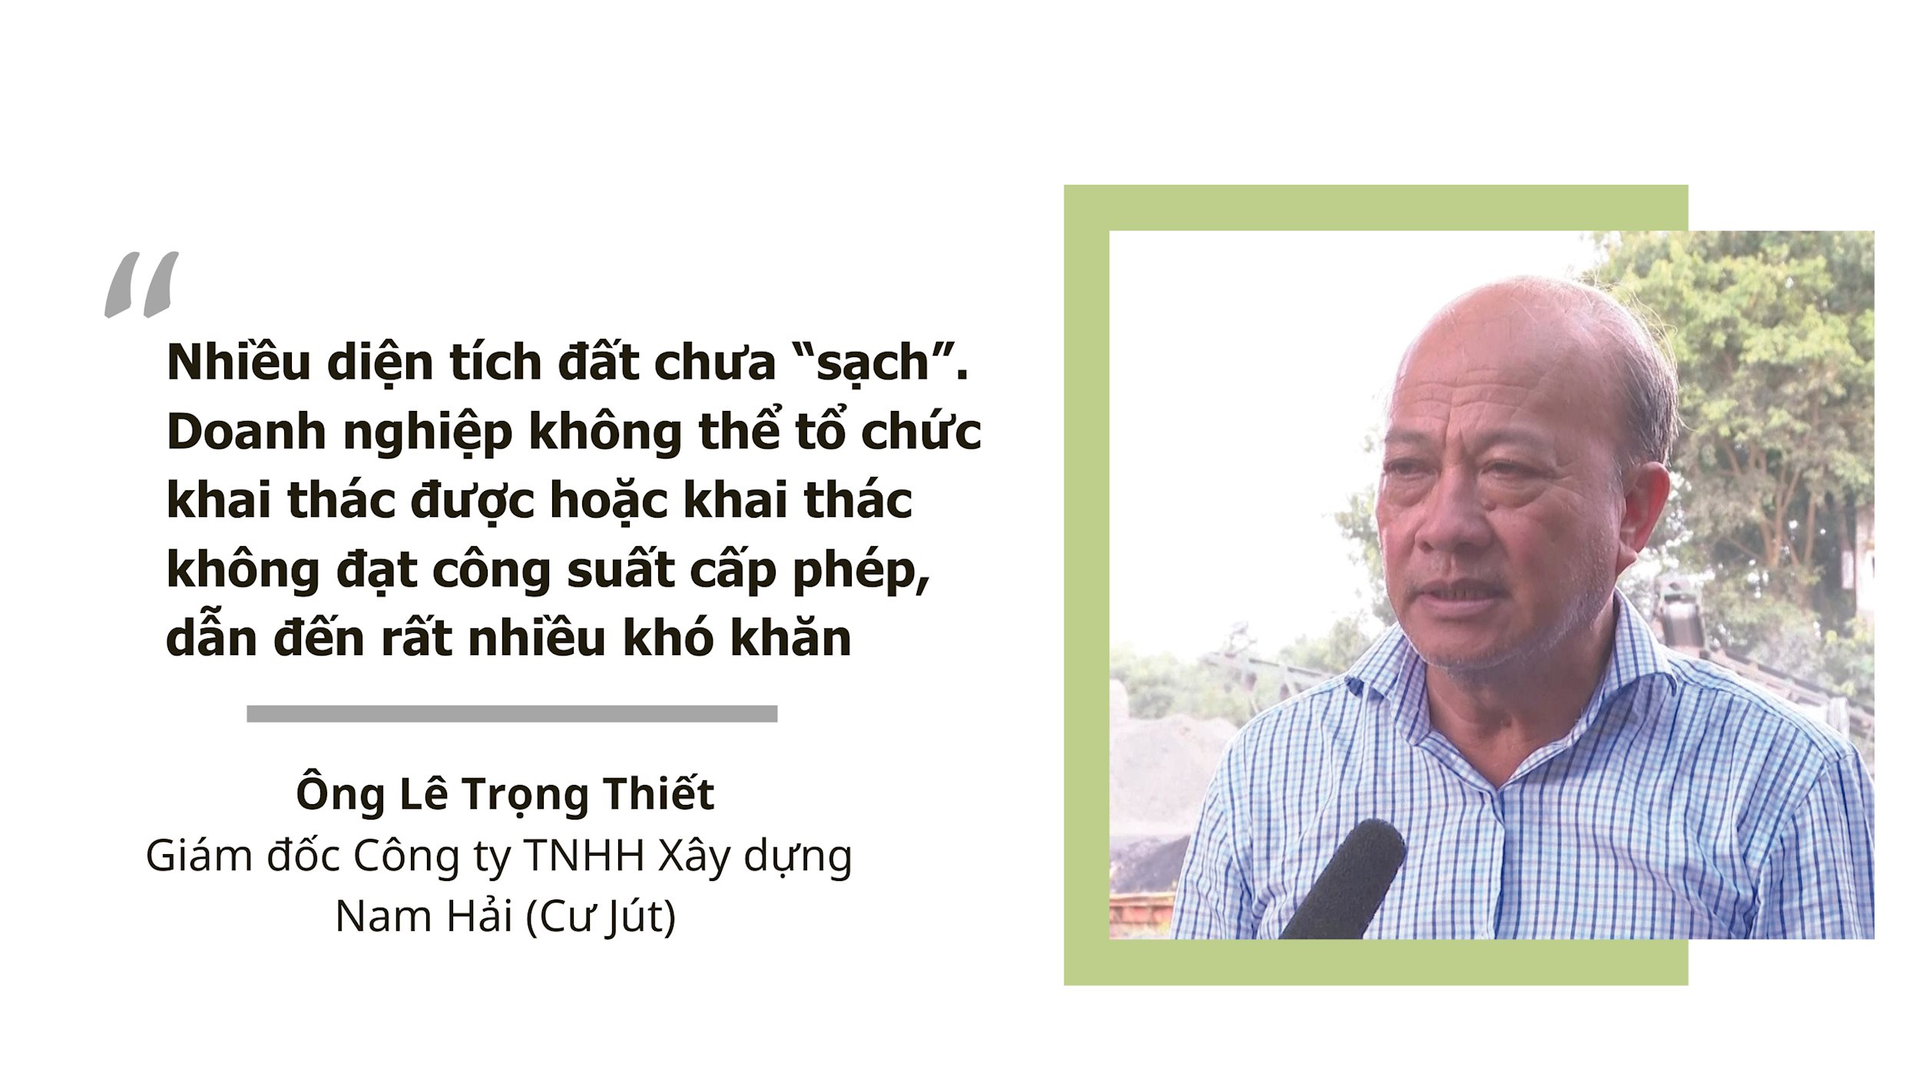 ong-thiet.png